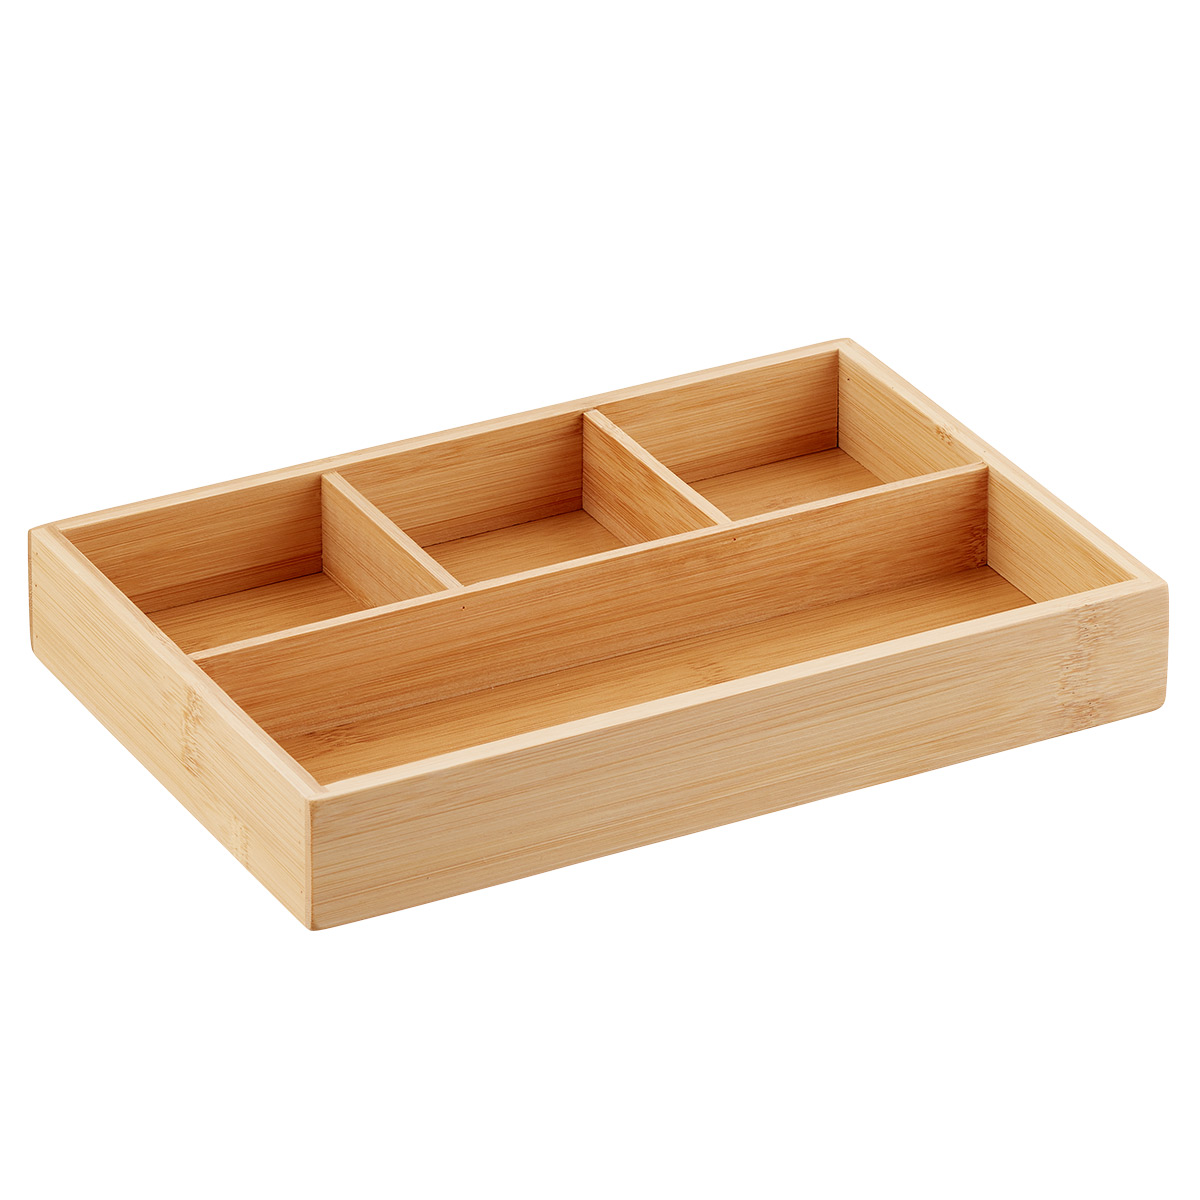 The Container Store 4-Section Bamboo Drawer Organizer